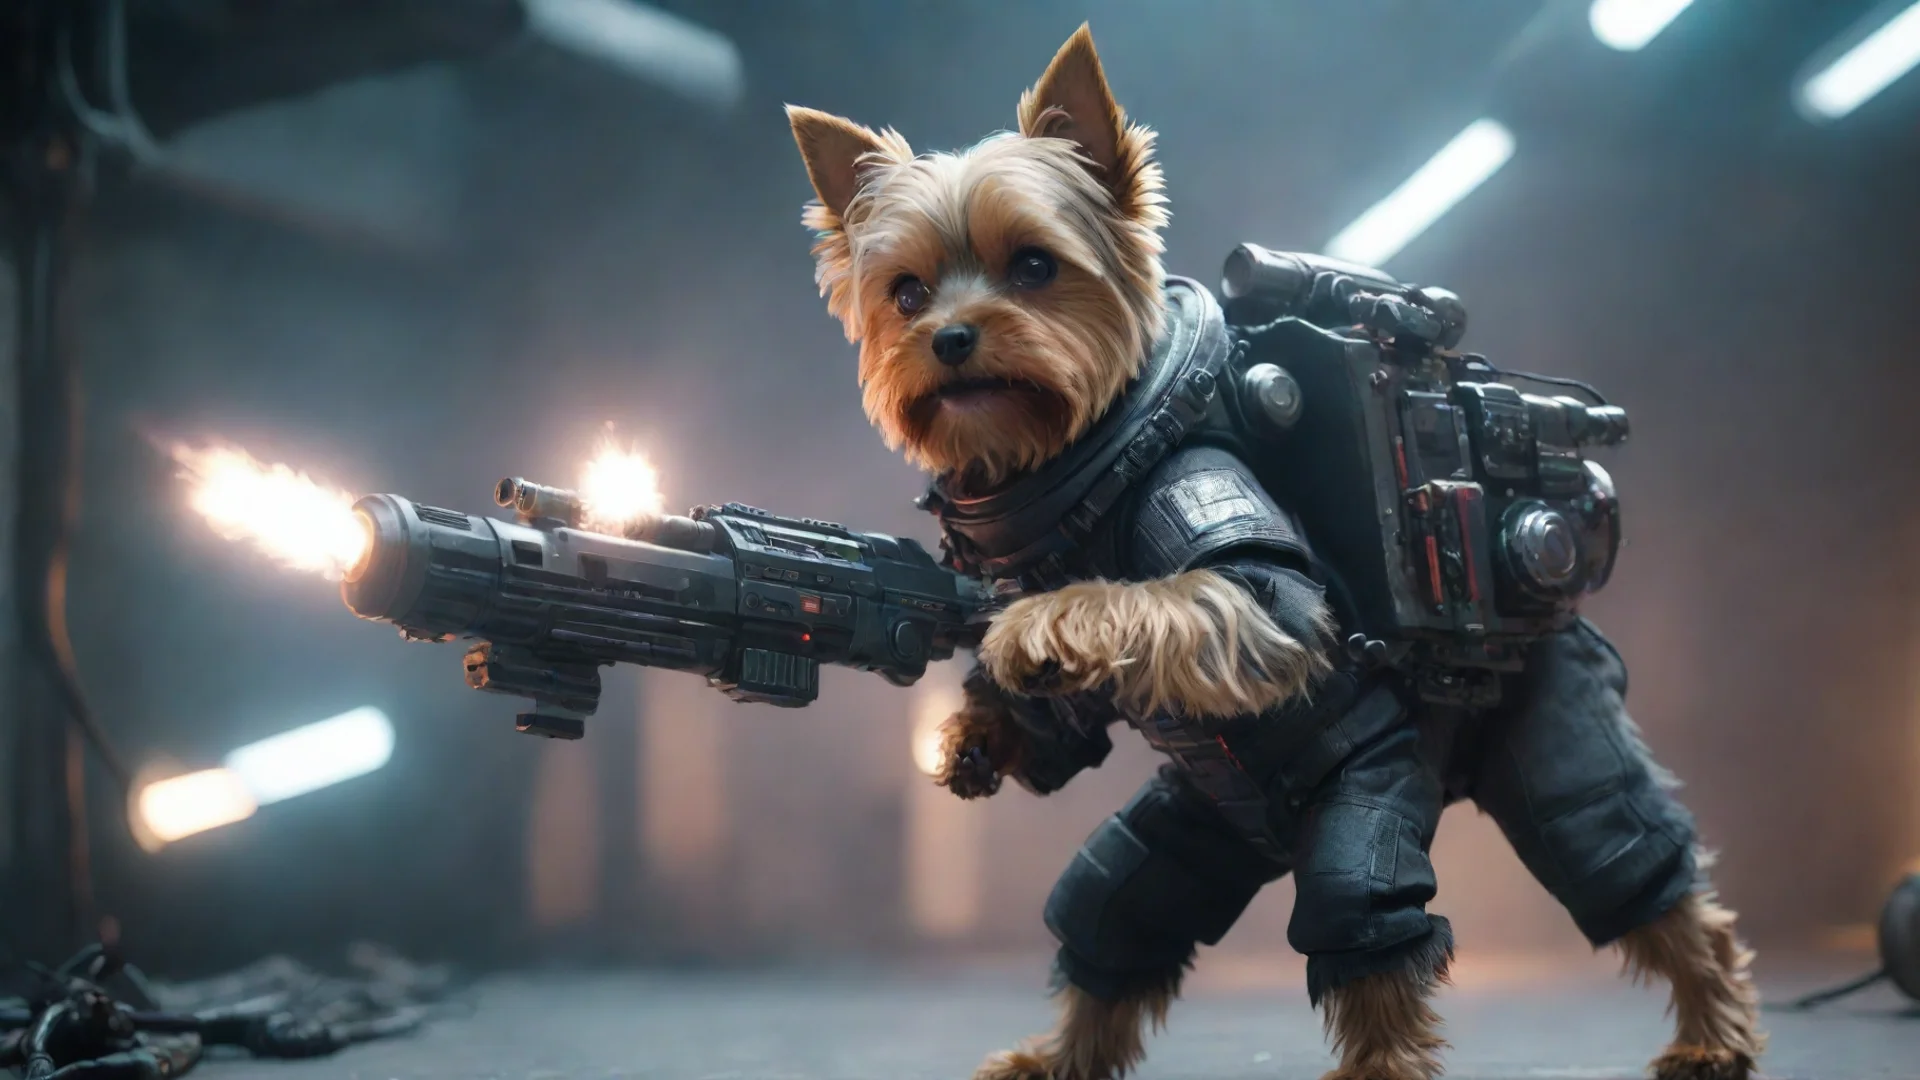 artstation art aione yorkshire terrier in a cyberpunk space suit firing big weapon lot lighting confident engaging wow 3 wide